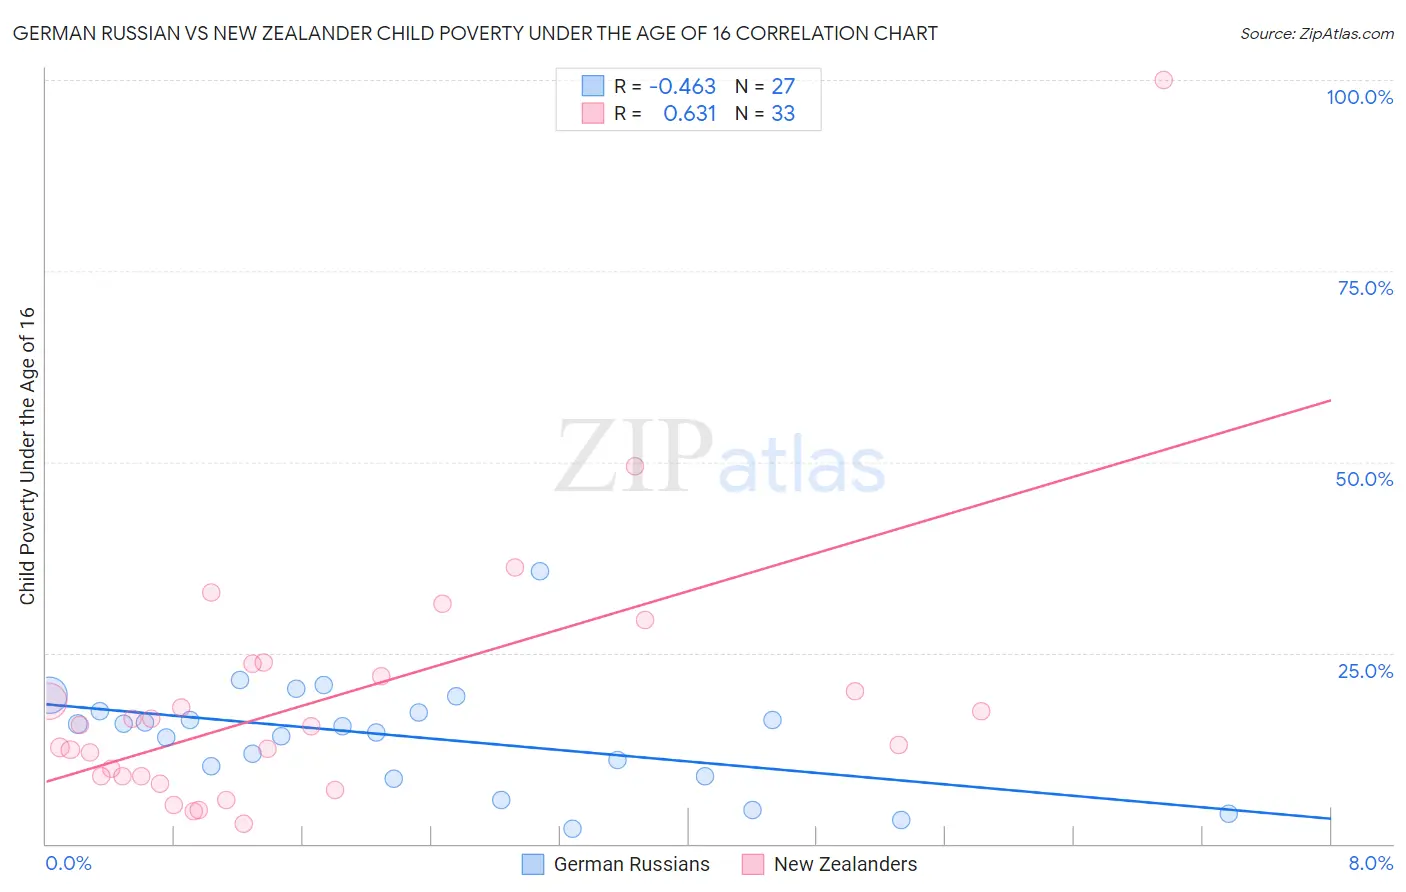 German Russian vs New Zealander Child Poverty Under the Age of 16